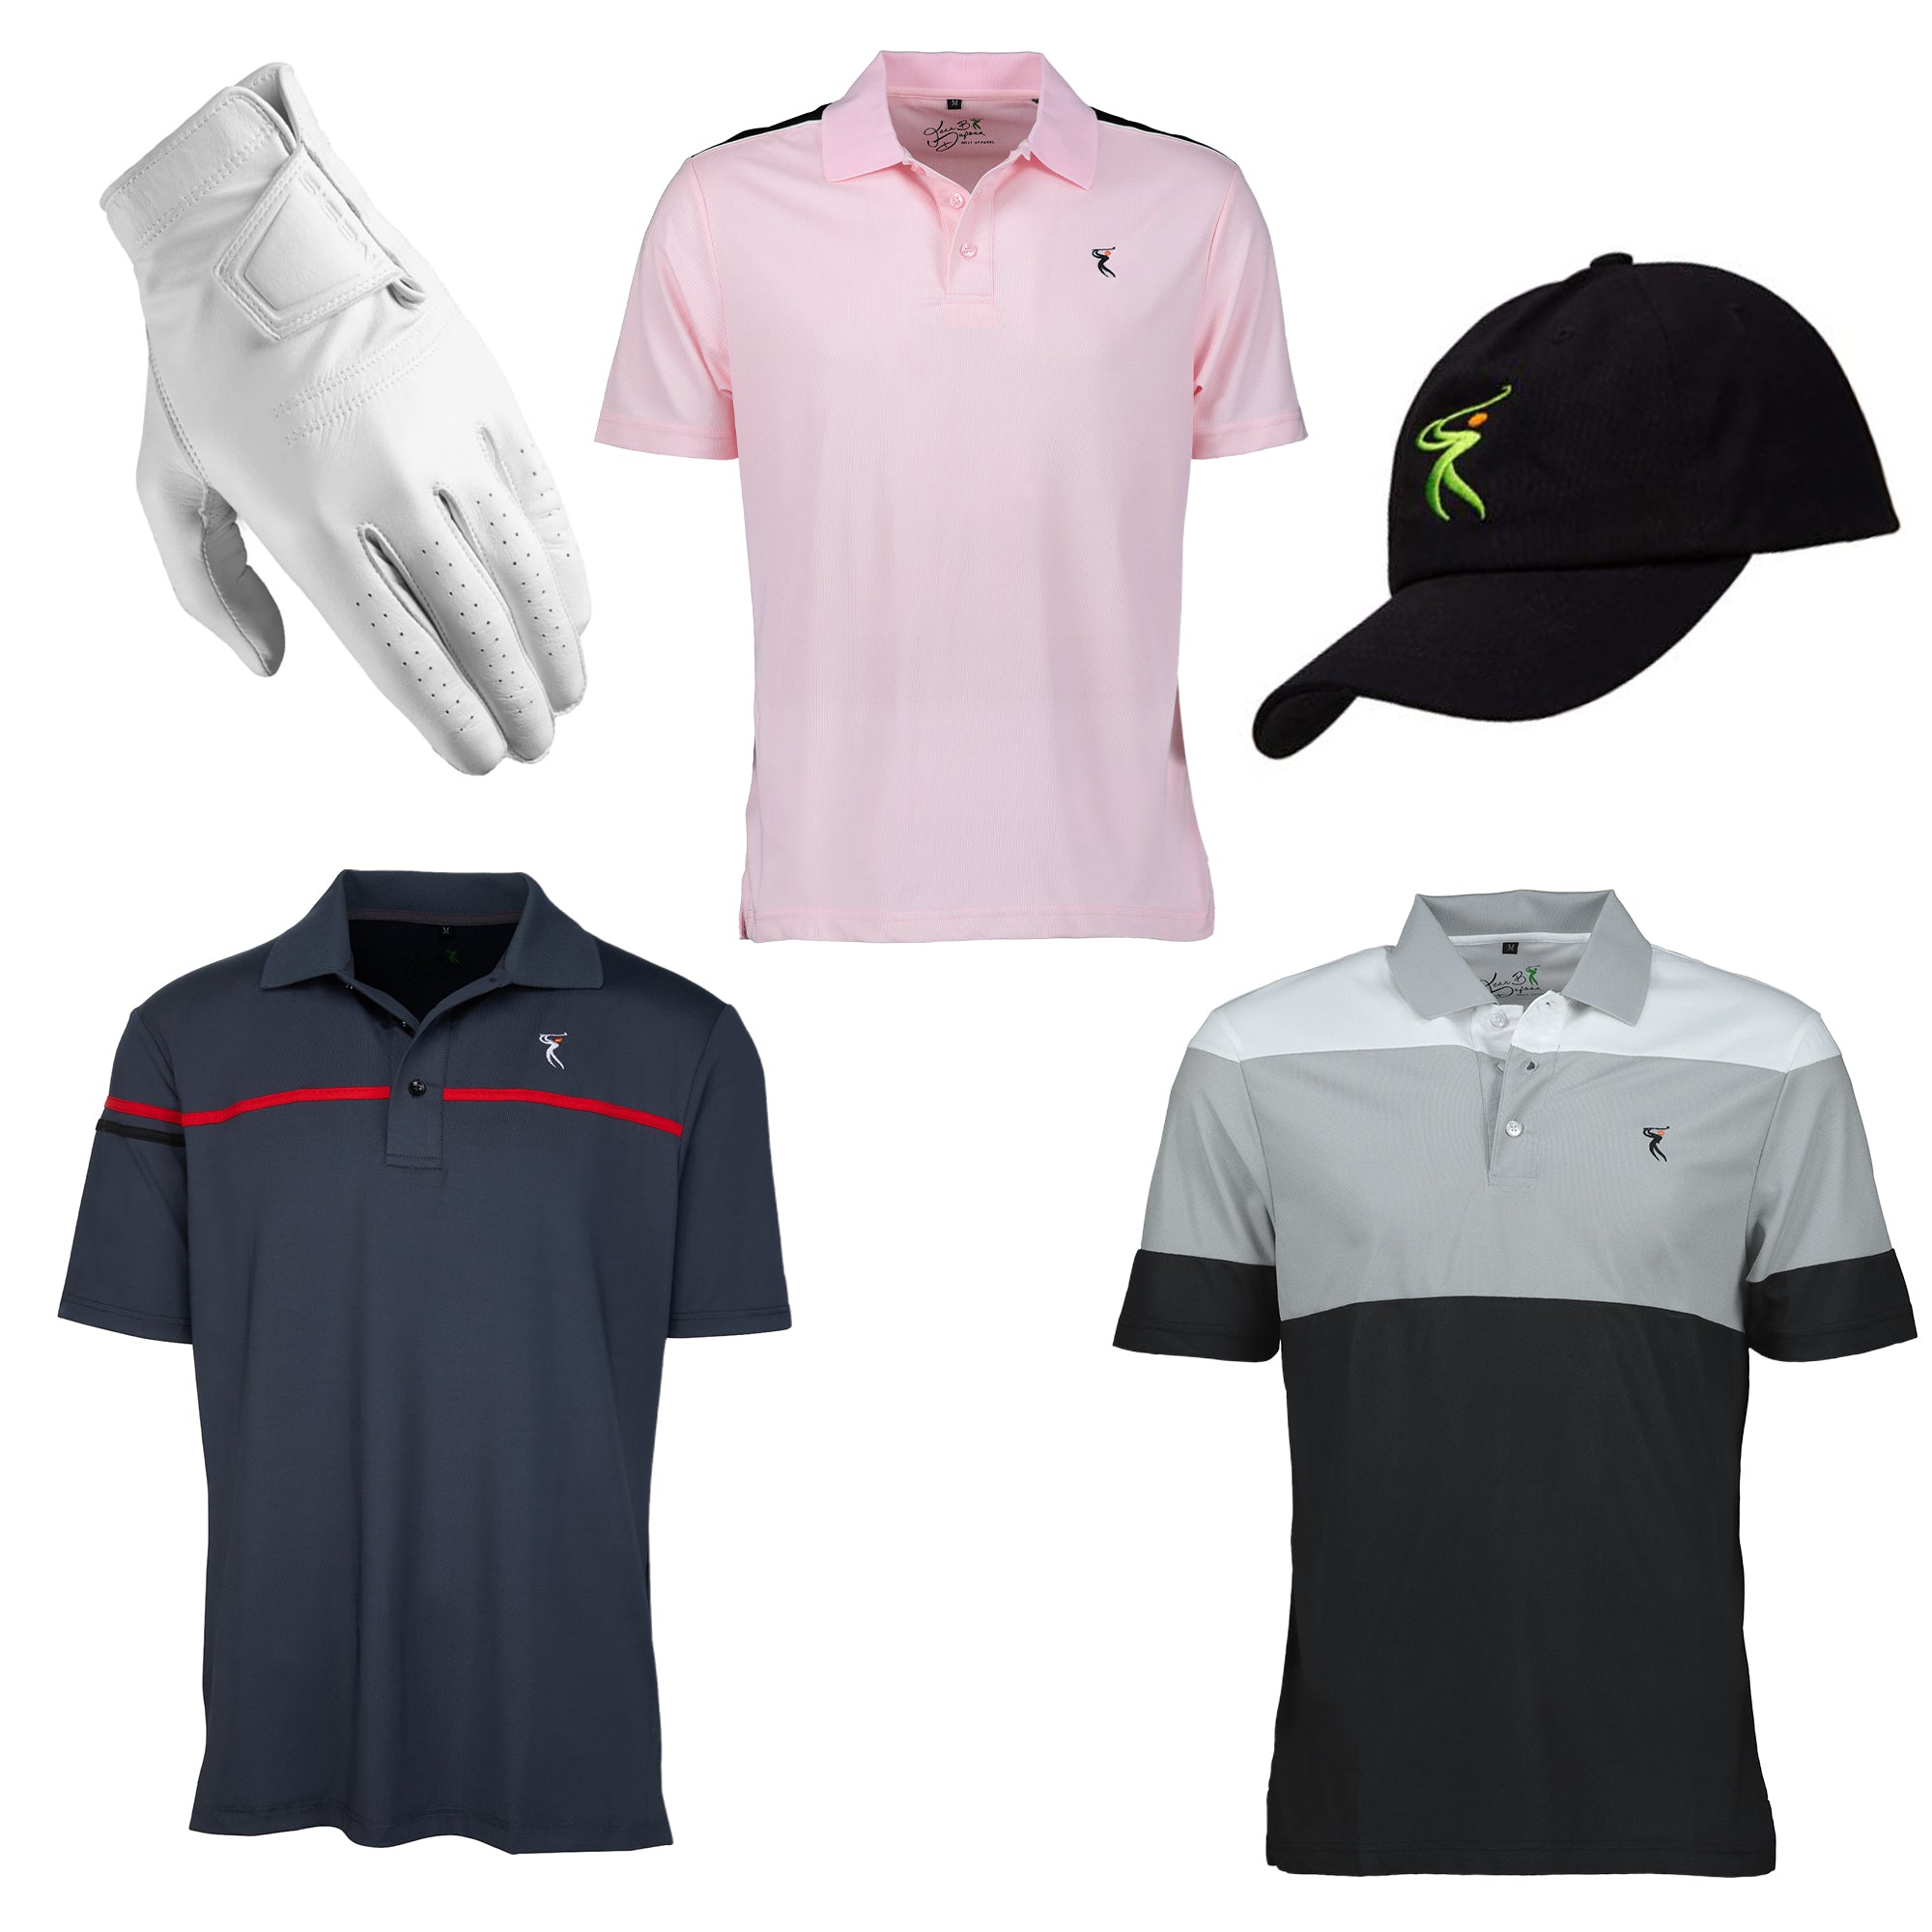 MEN'S DRI-FIT GOLF SHIRTS COMBO (Pack of 3) Golf Hat and Leather Glove For FREE!!!